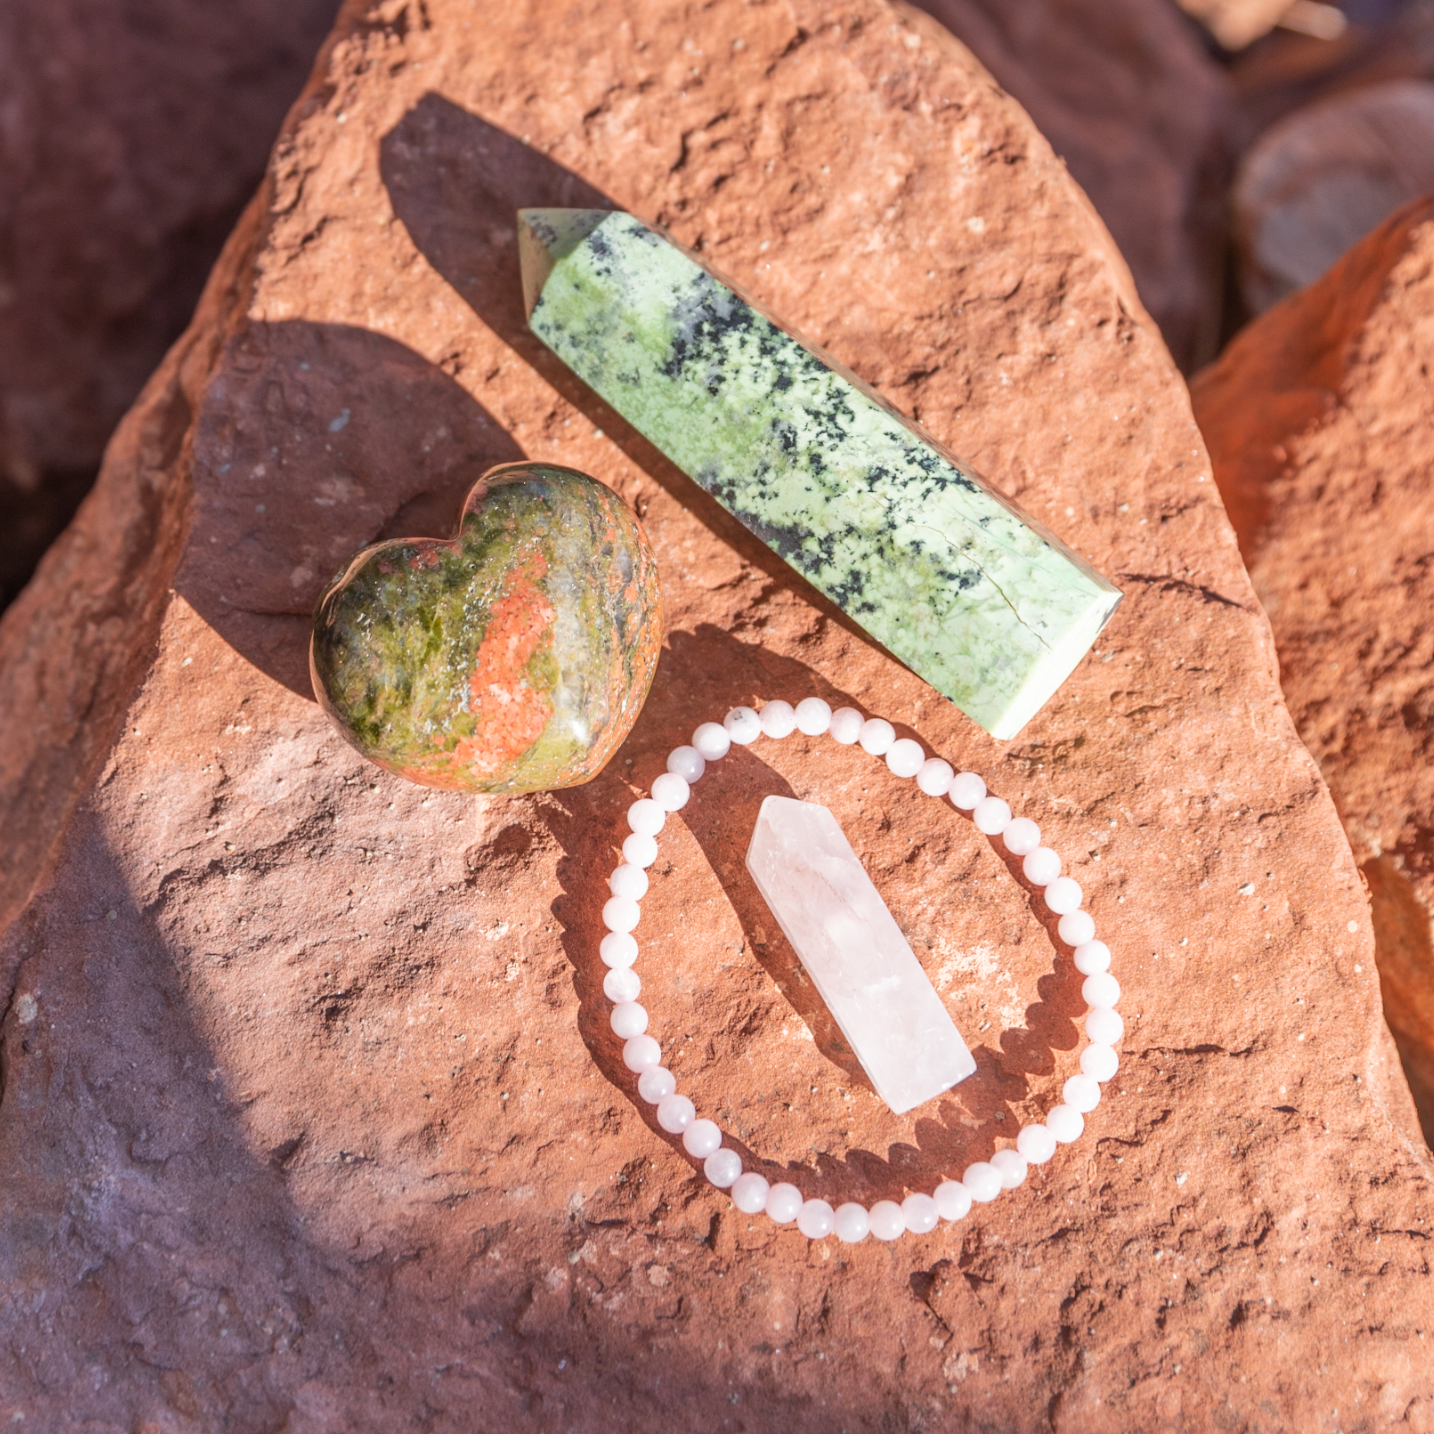 healing crystals: a bundle of crystals used to help with fertility in sedona, arizona